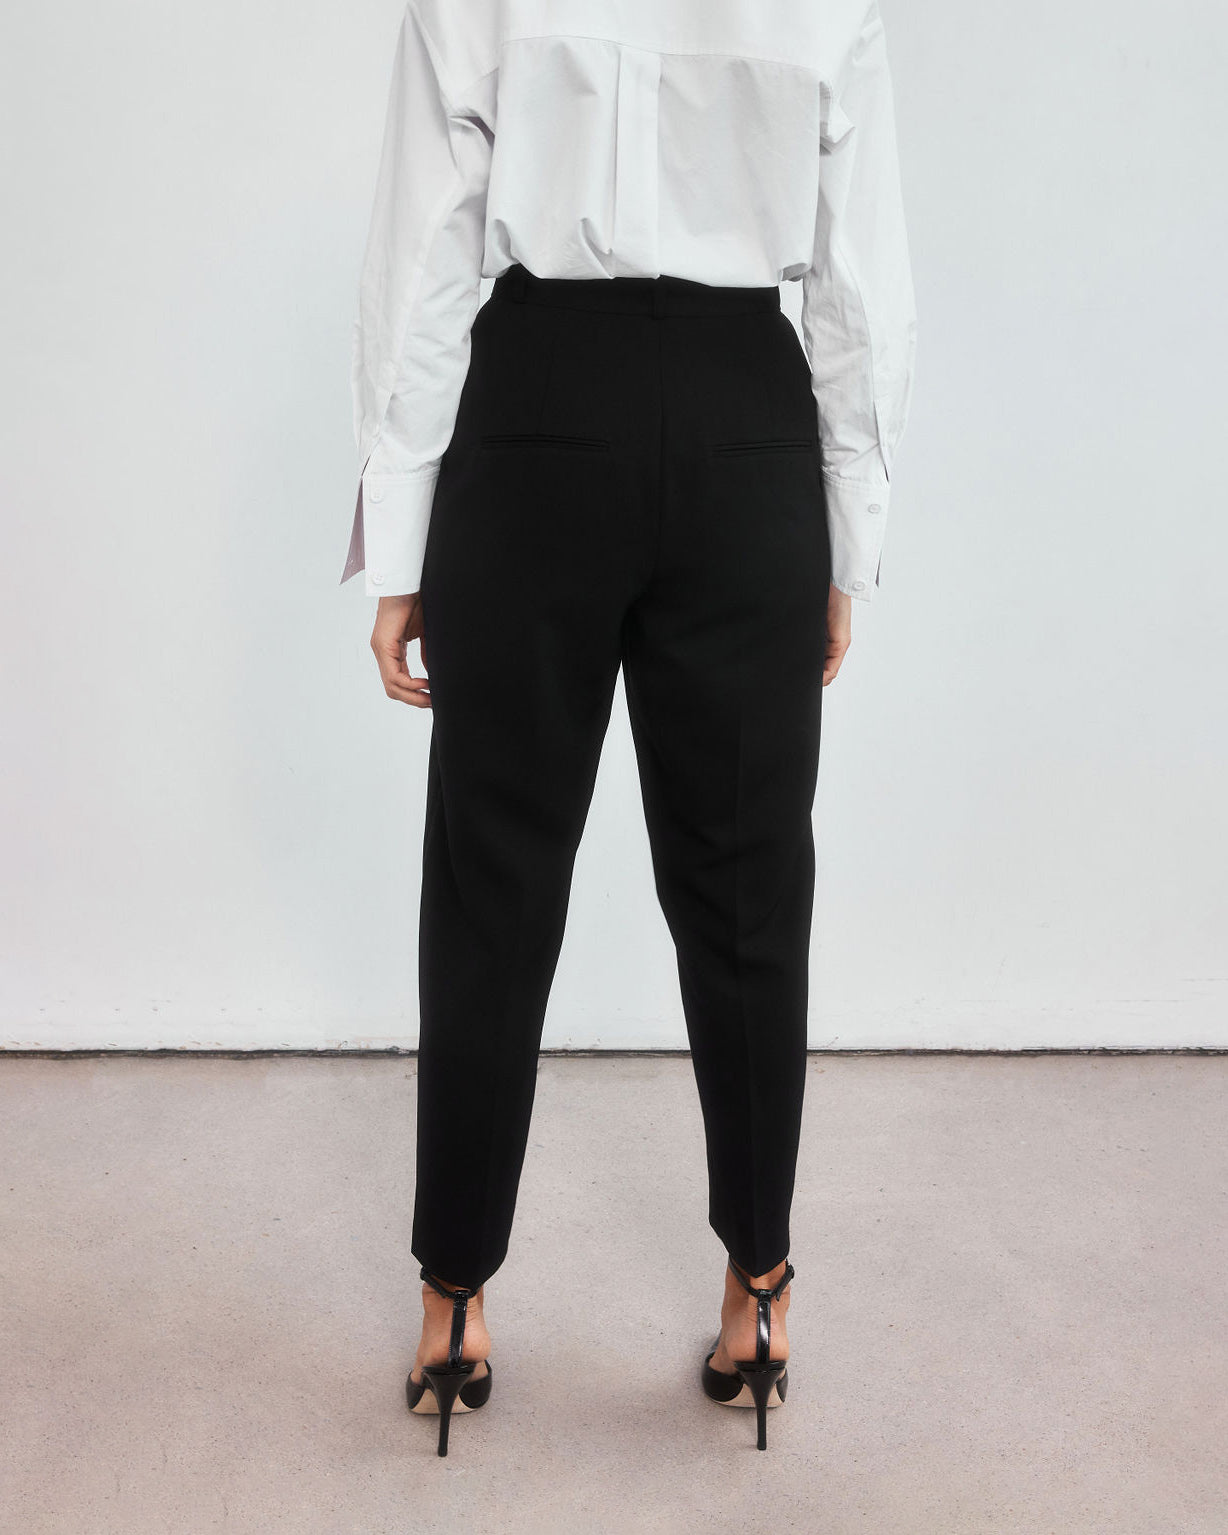 Back view of minimalistic high-waisted black peg leg trousers on a middle aged woman. 